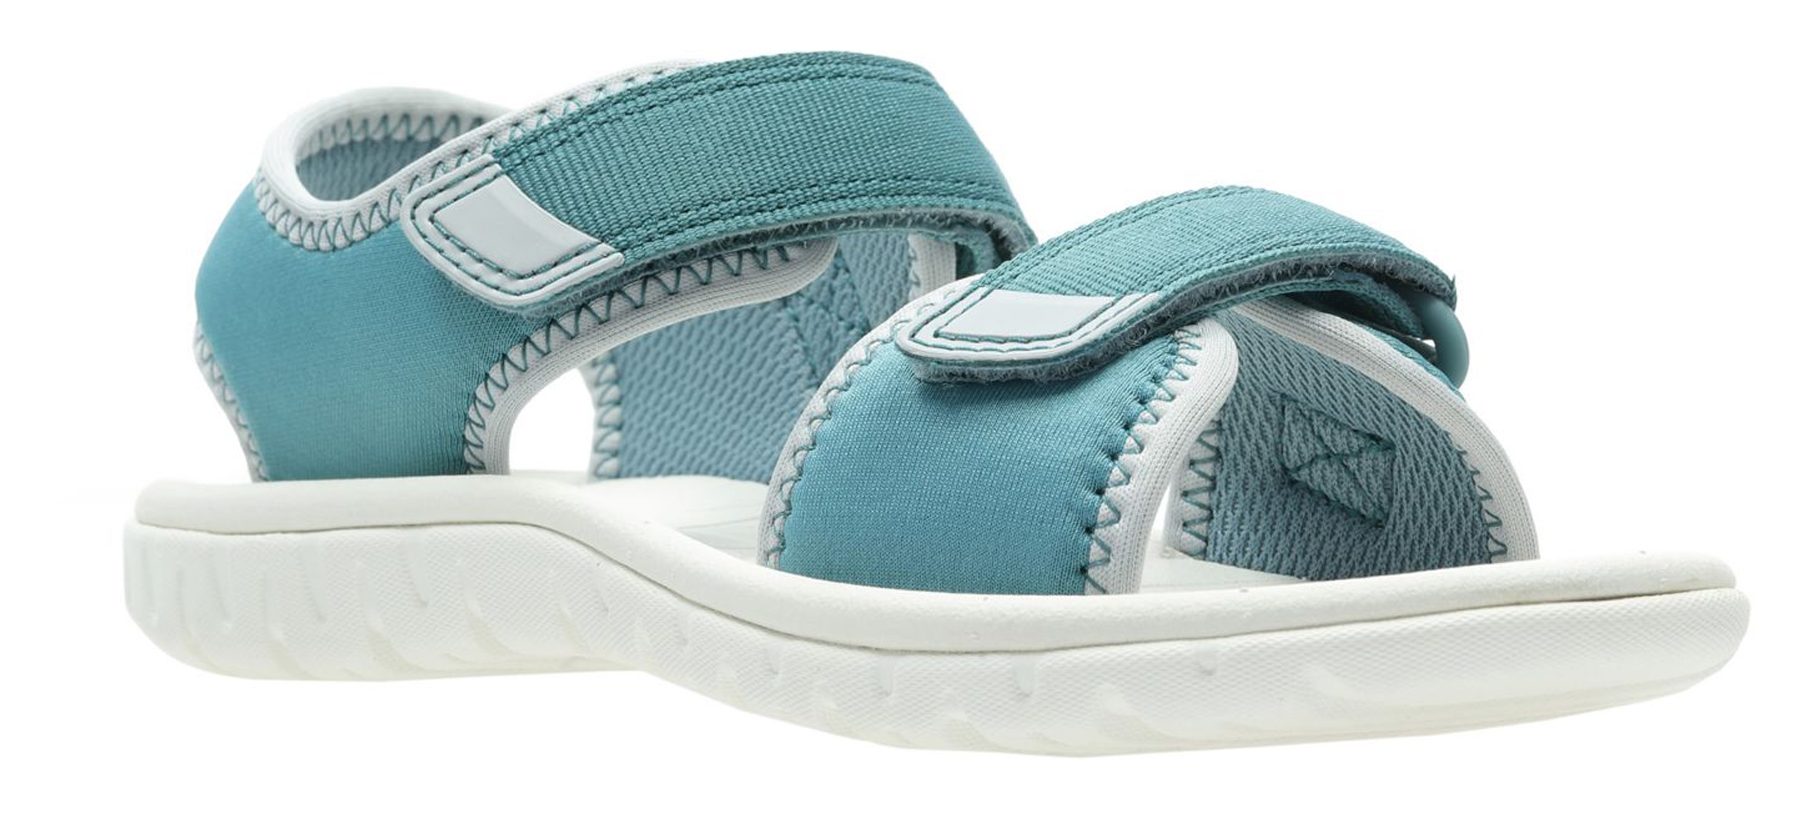 Clarks Surfing Tide Kid Teal Synthetic 26140849 - Girls Sandals ...